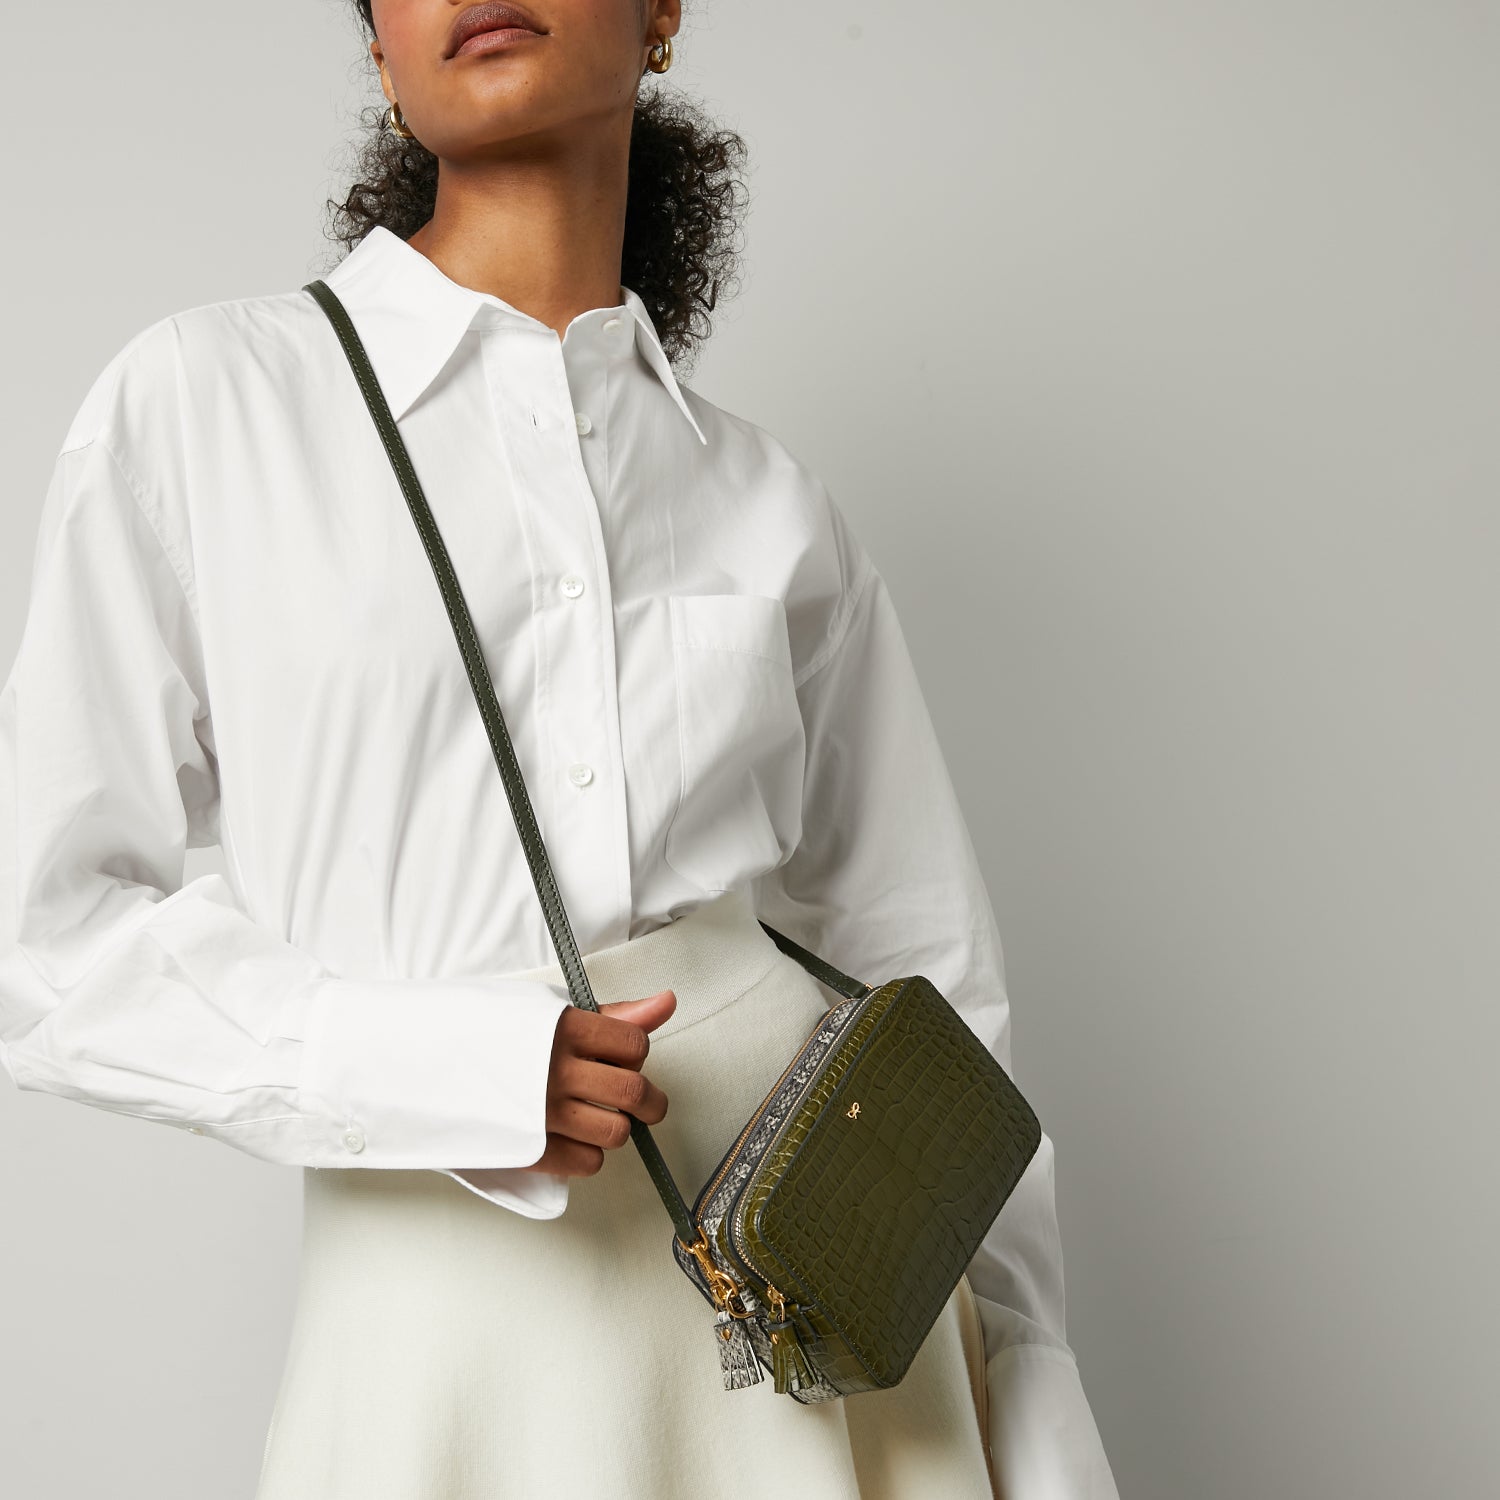 Double Zip Cross-body -

                  
                    Croc-Effect Calf Leather in Olive -
                  

                  Anya Hindmarch UK
